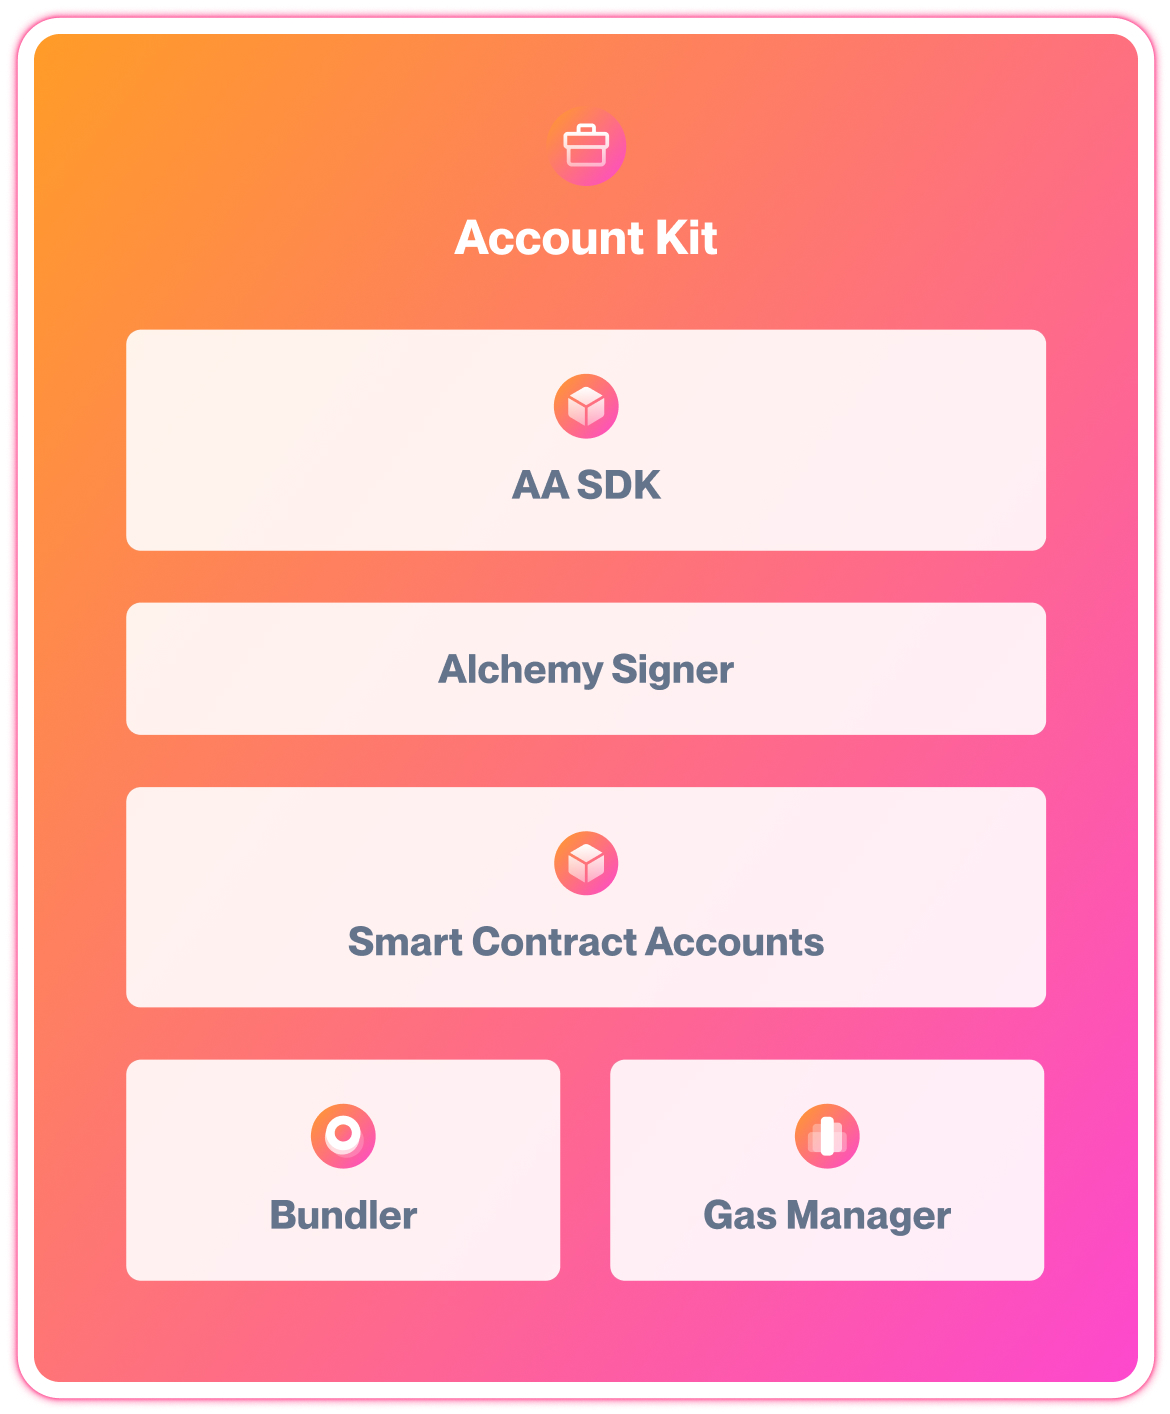 Account Kit Overview